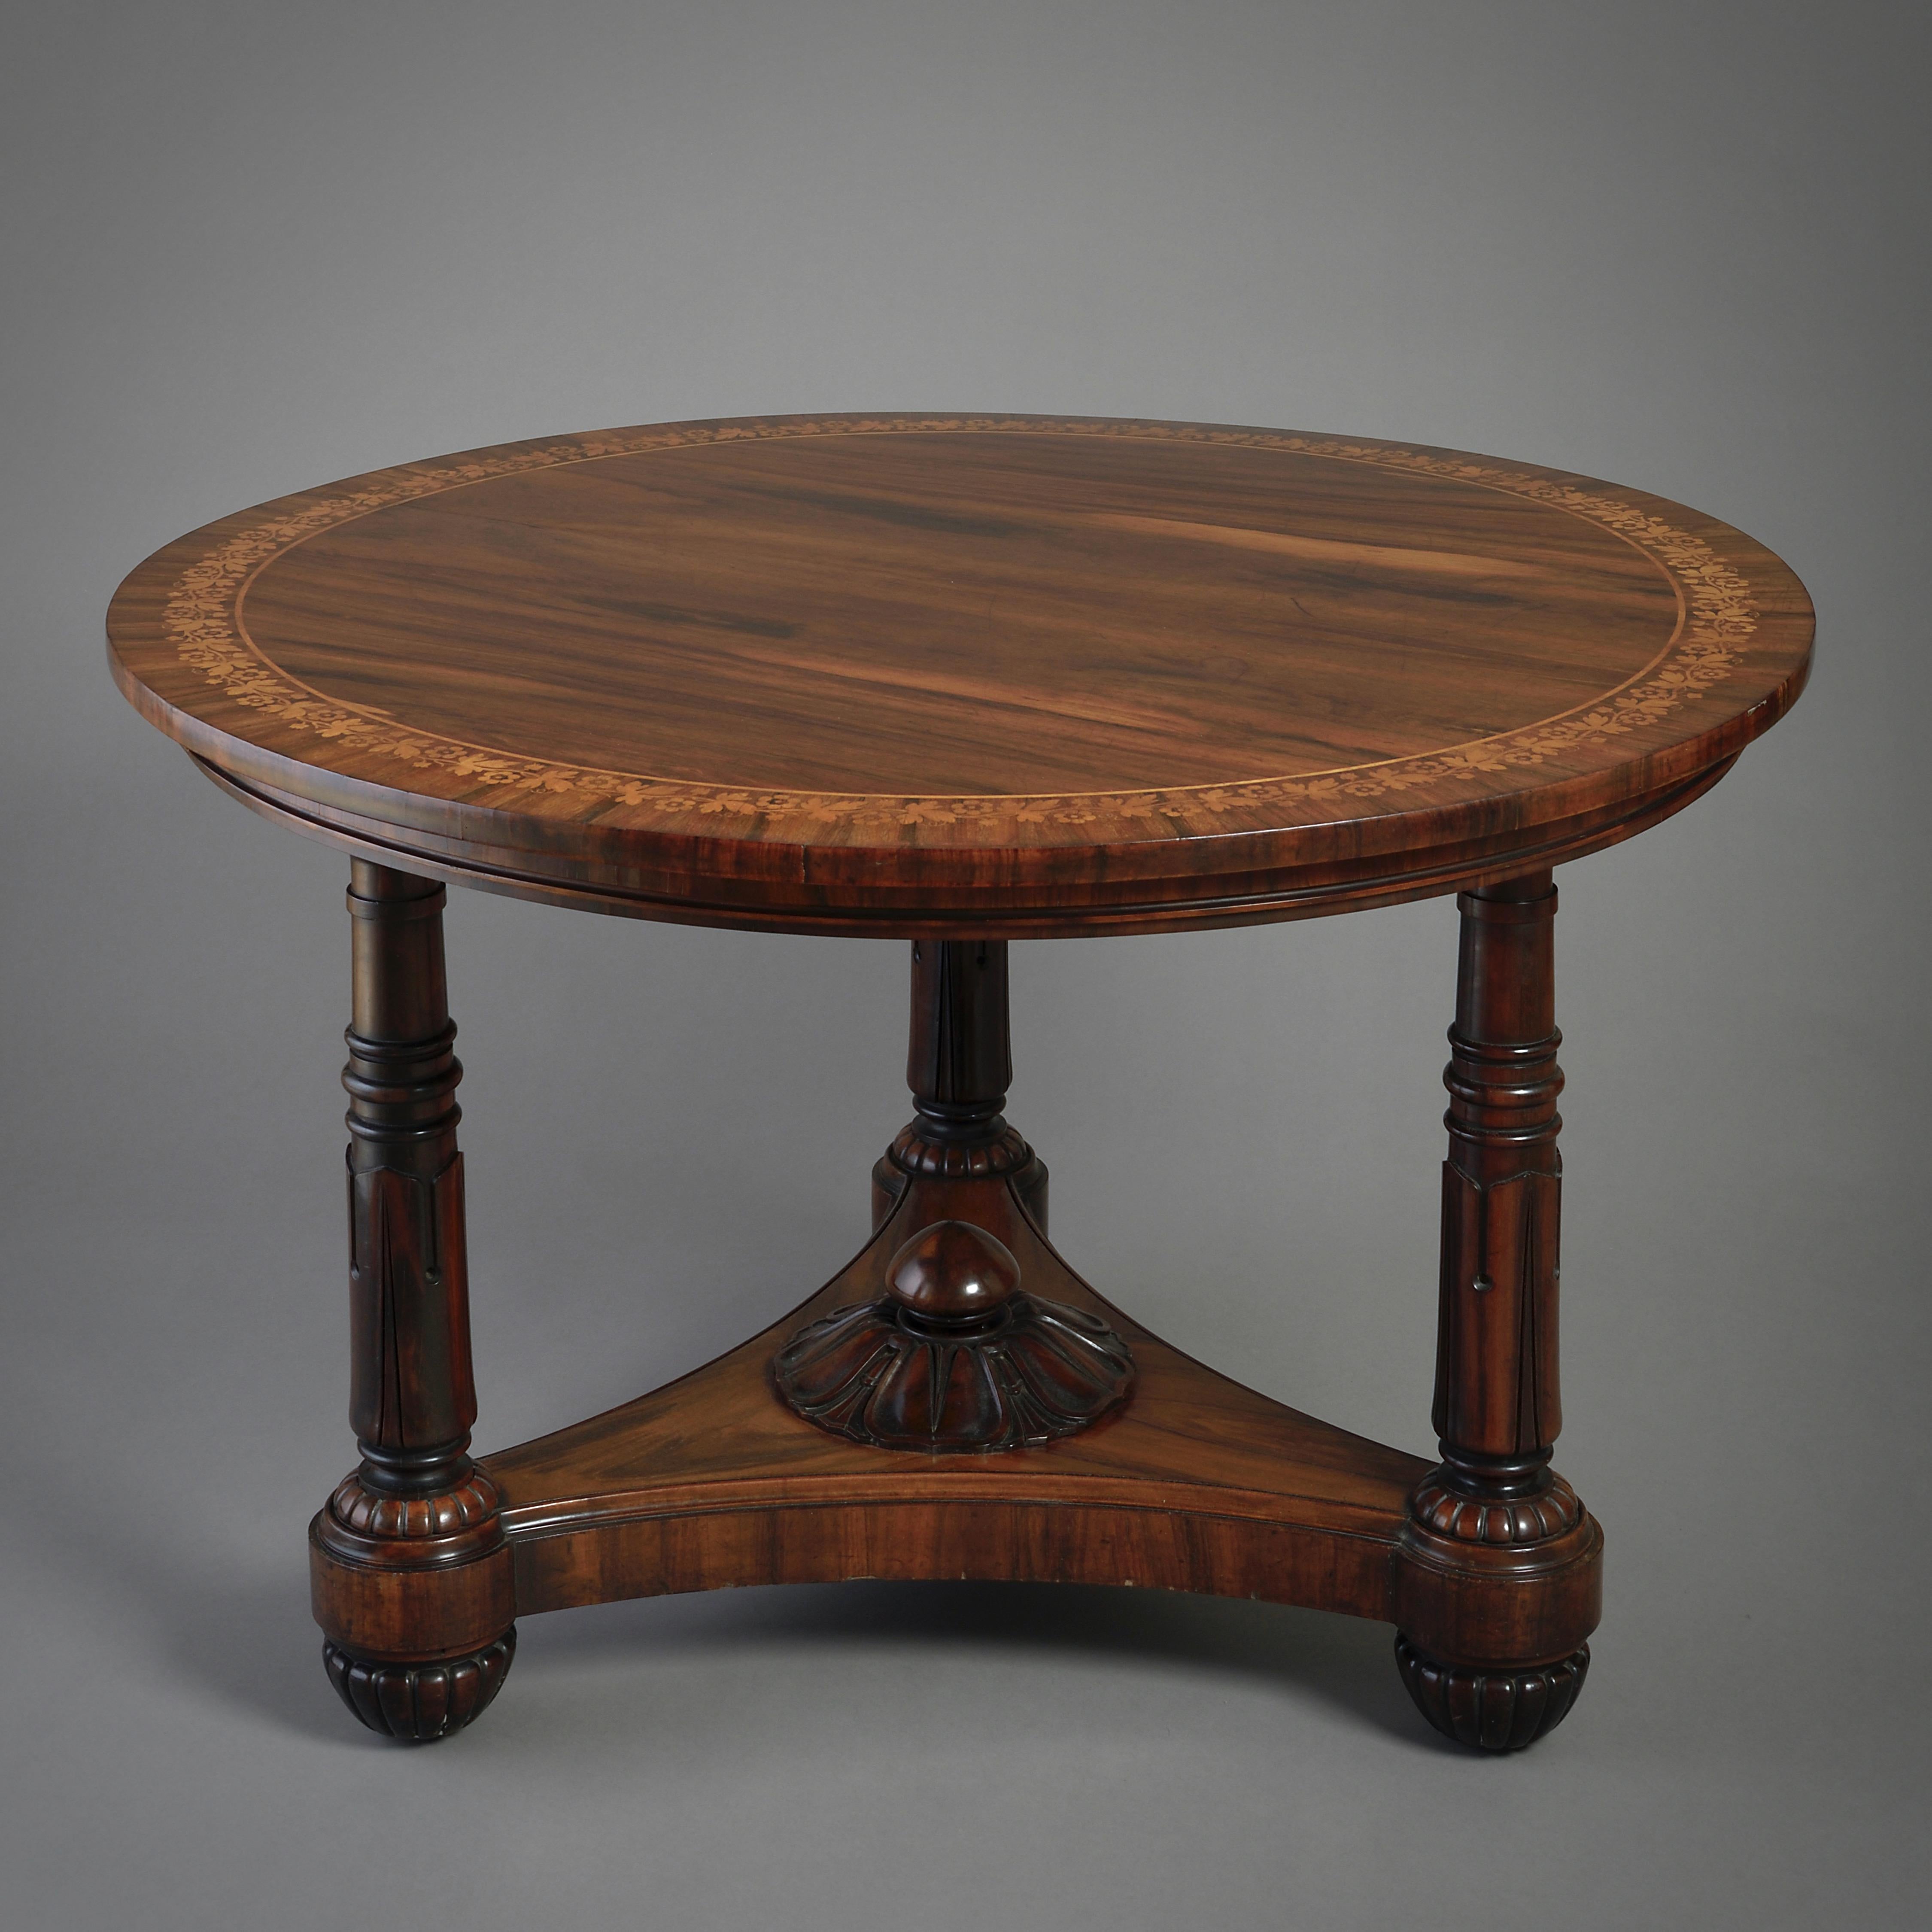 A fine regency Goncalo Alves centre table in the manner of George bullock, circa 1820.

Inlaid in holly with a band of leaves and flowers.